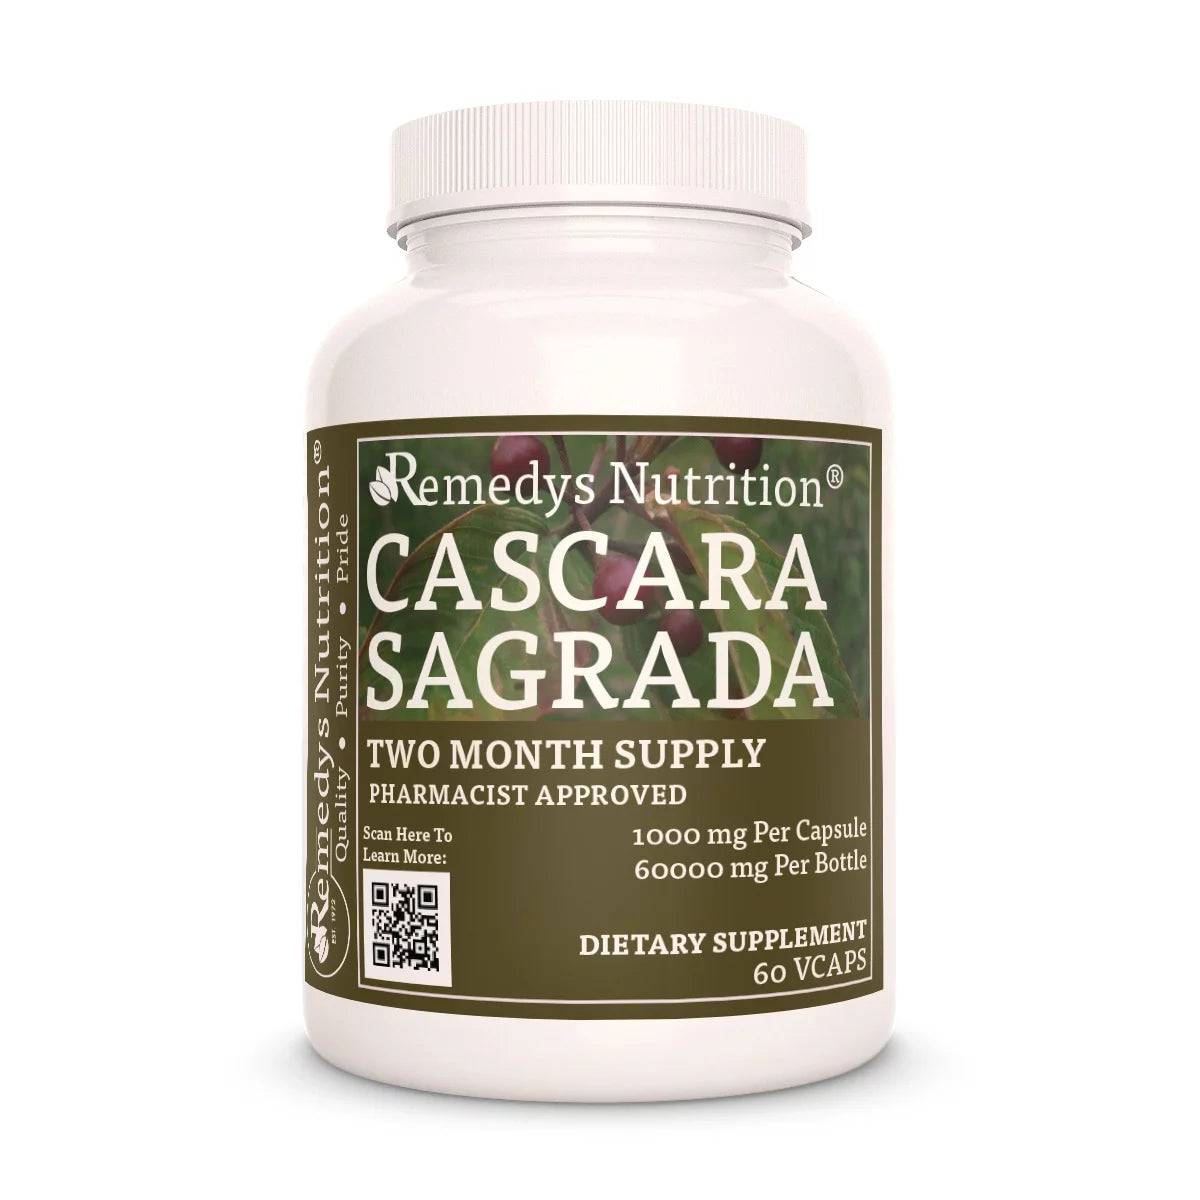 Image of Remedy's Nutrition® Cascara Sagrada Capsules Dietary Herbal Supplement front bottle. Made in USA. Rhamnus purshiana.